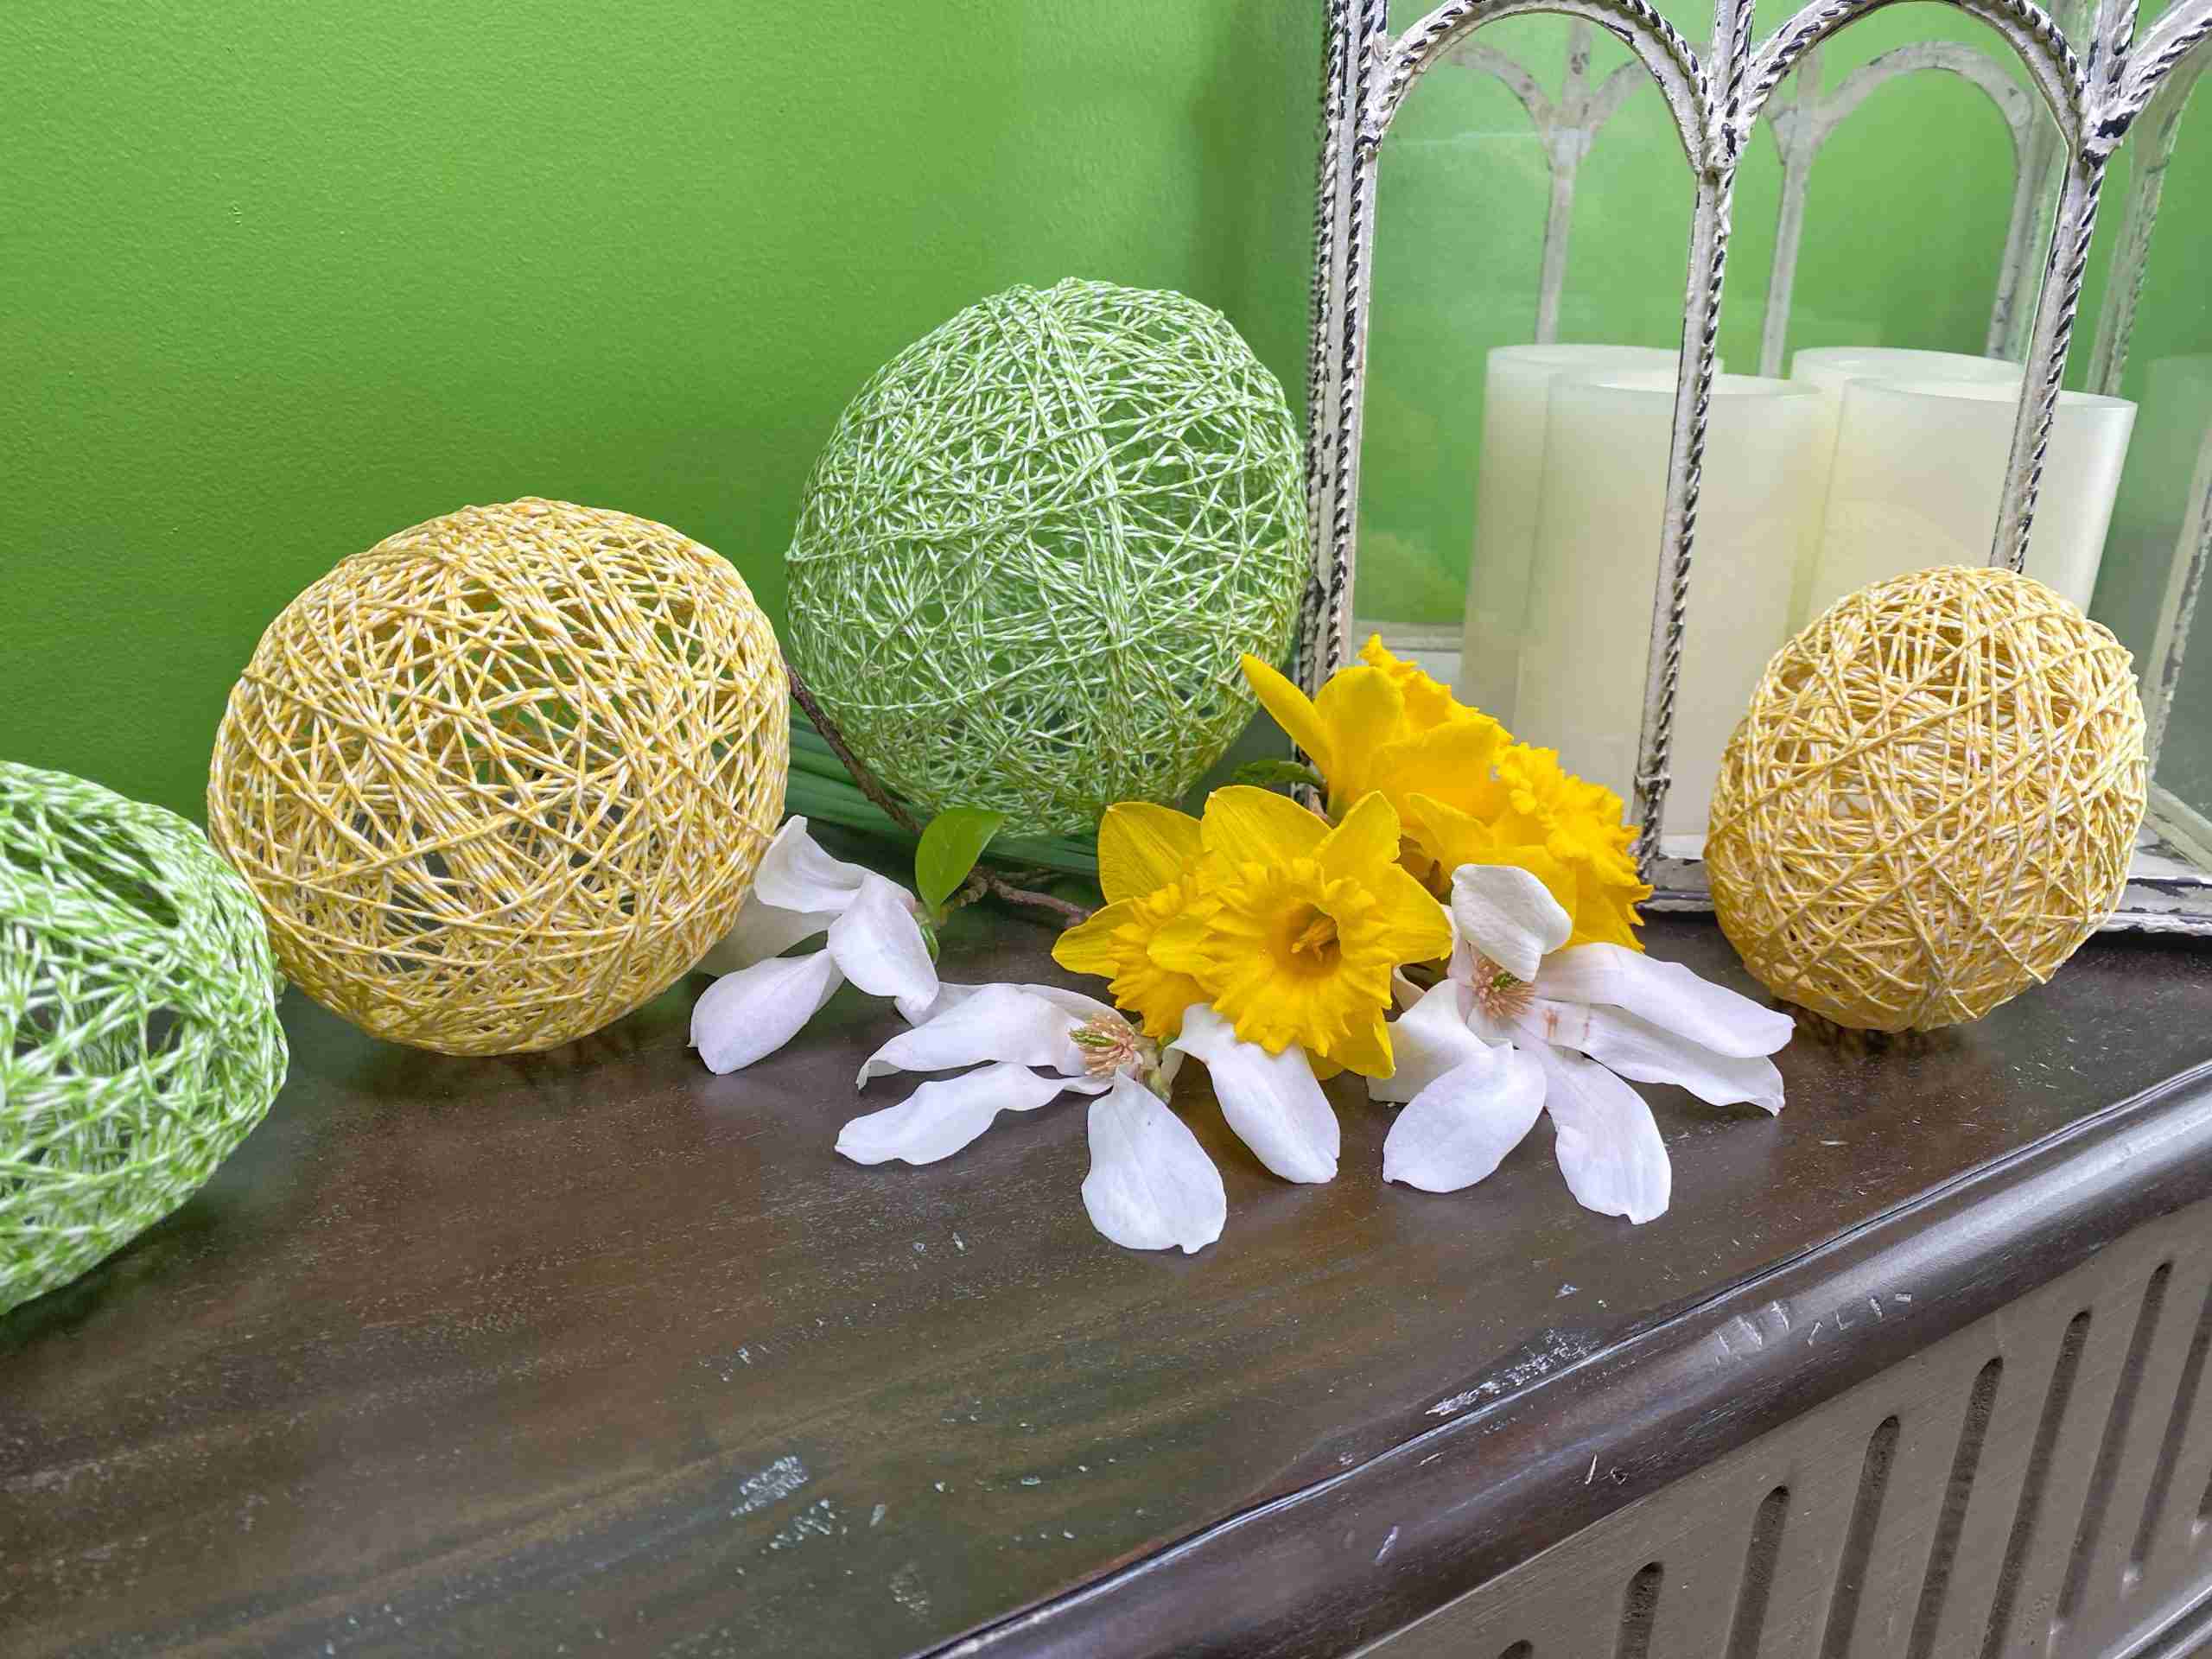 yellow string egg, green string egg, bakers twine easter eggs, string balloon egg, springtime, spring decor, easter decorations, farmhouse style, floral tree branch, spring flowers, yellow daffodils